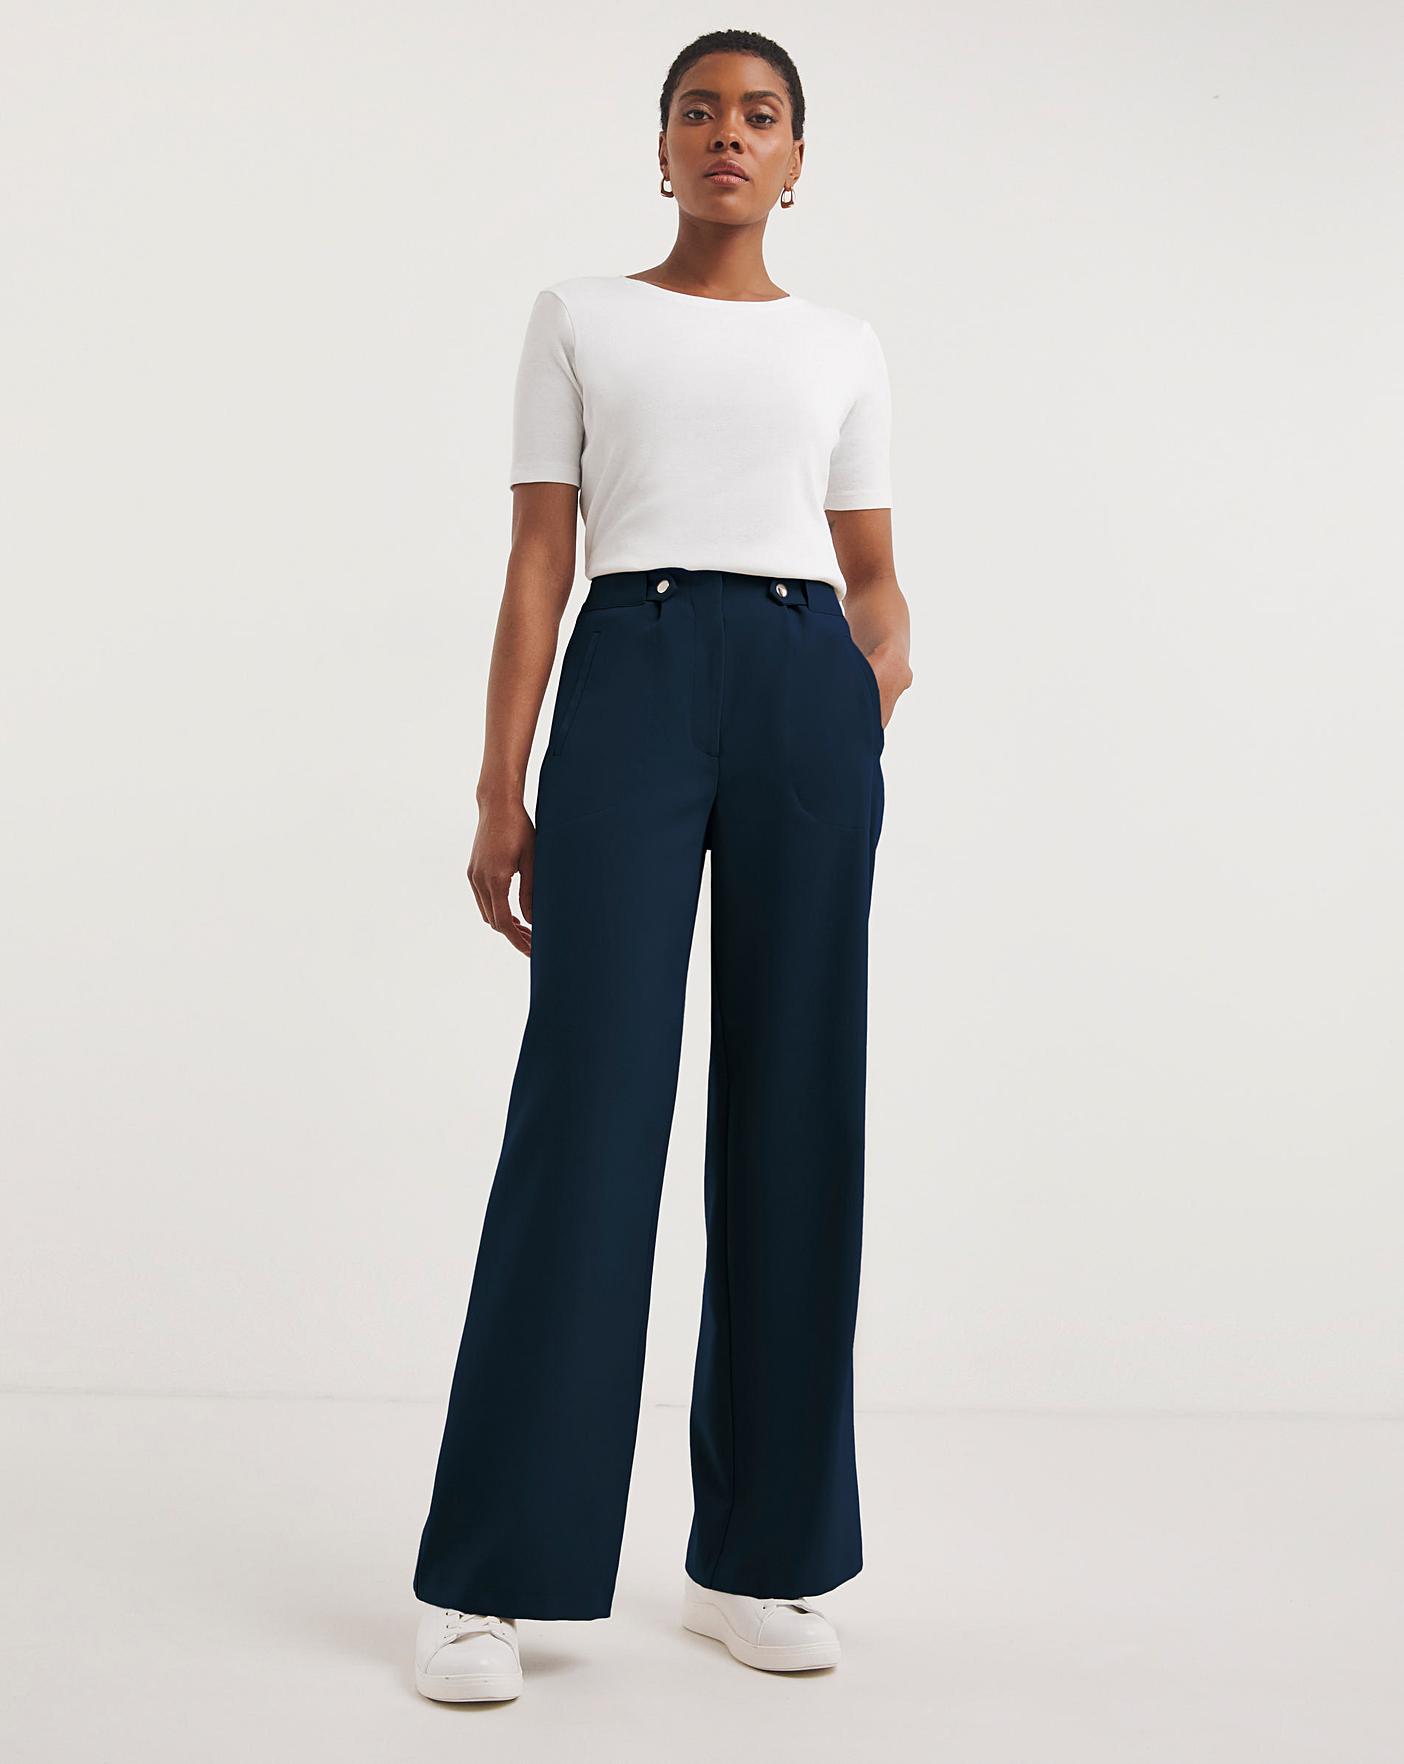 COS High-Waisted Wide-Leg Trousers in BRIGHT BLUE | Endource